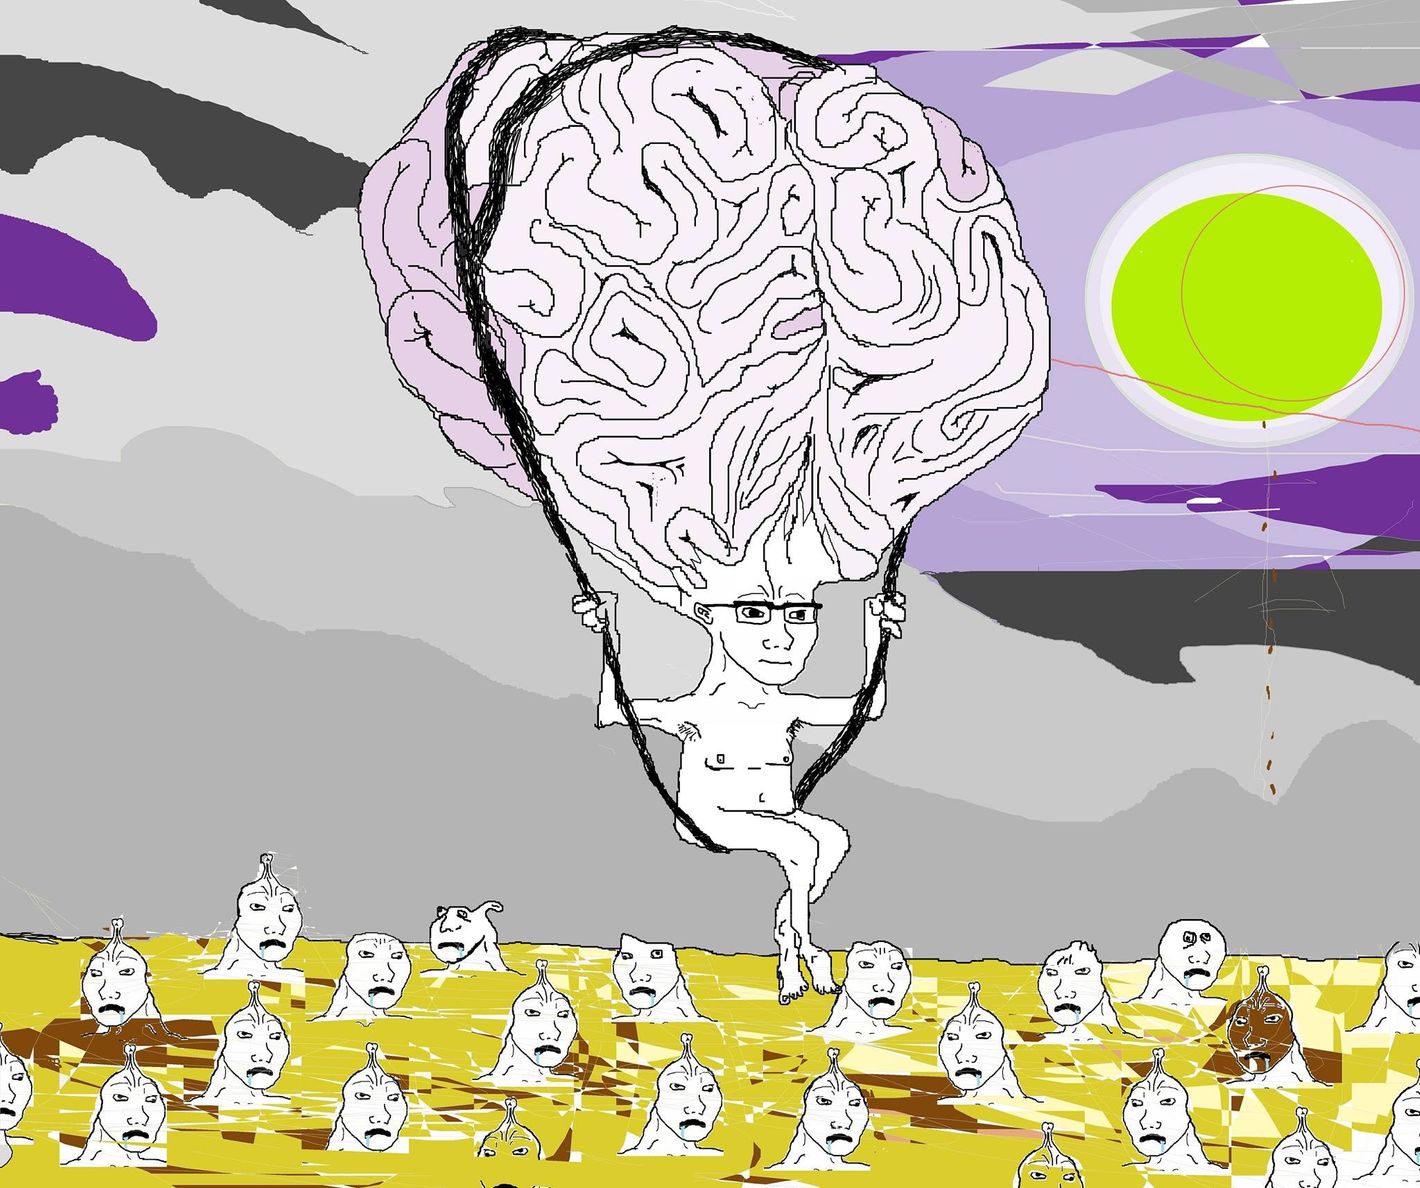 No "Brain balloon" memes have been featured yet. 